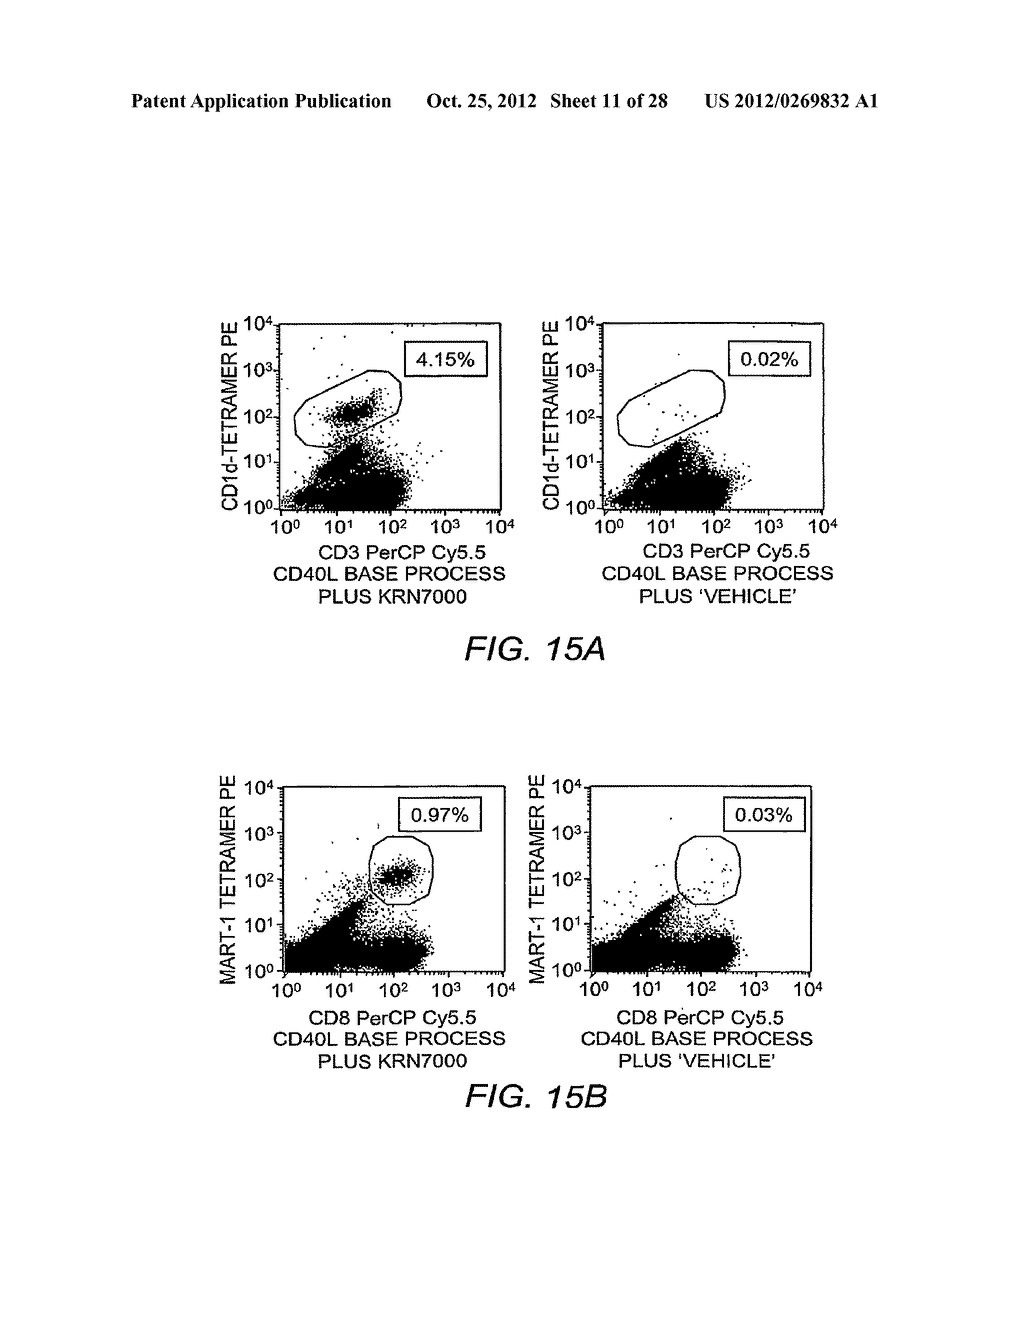 Mature Dendritic Cell Compositions and Methods of Culturing Same - diagram, schematic, and image 12